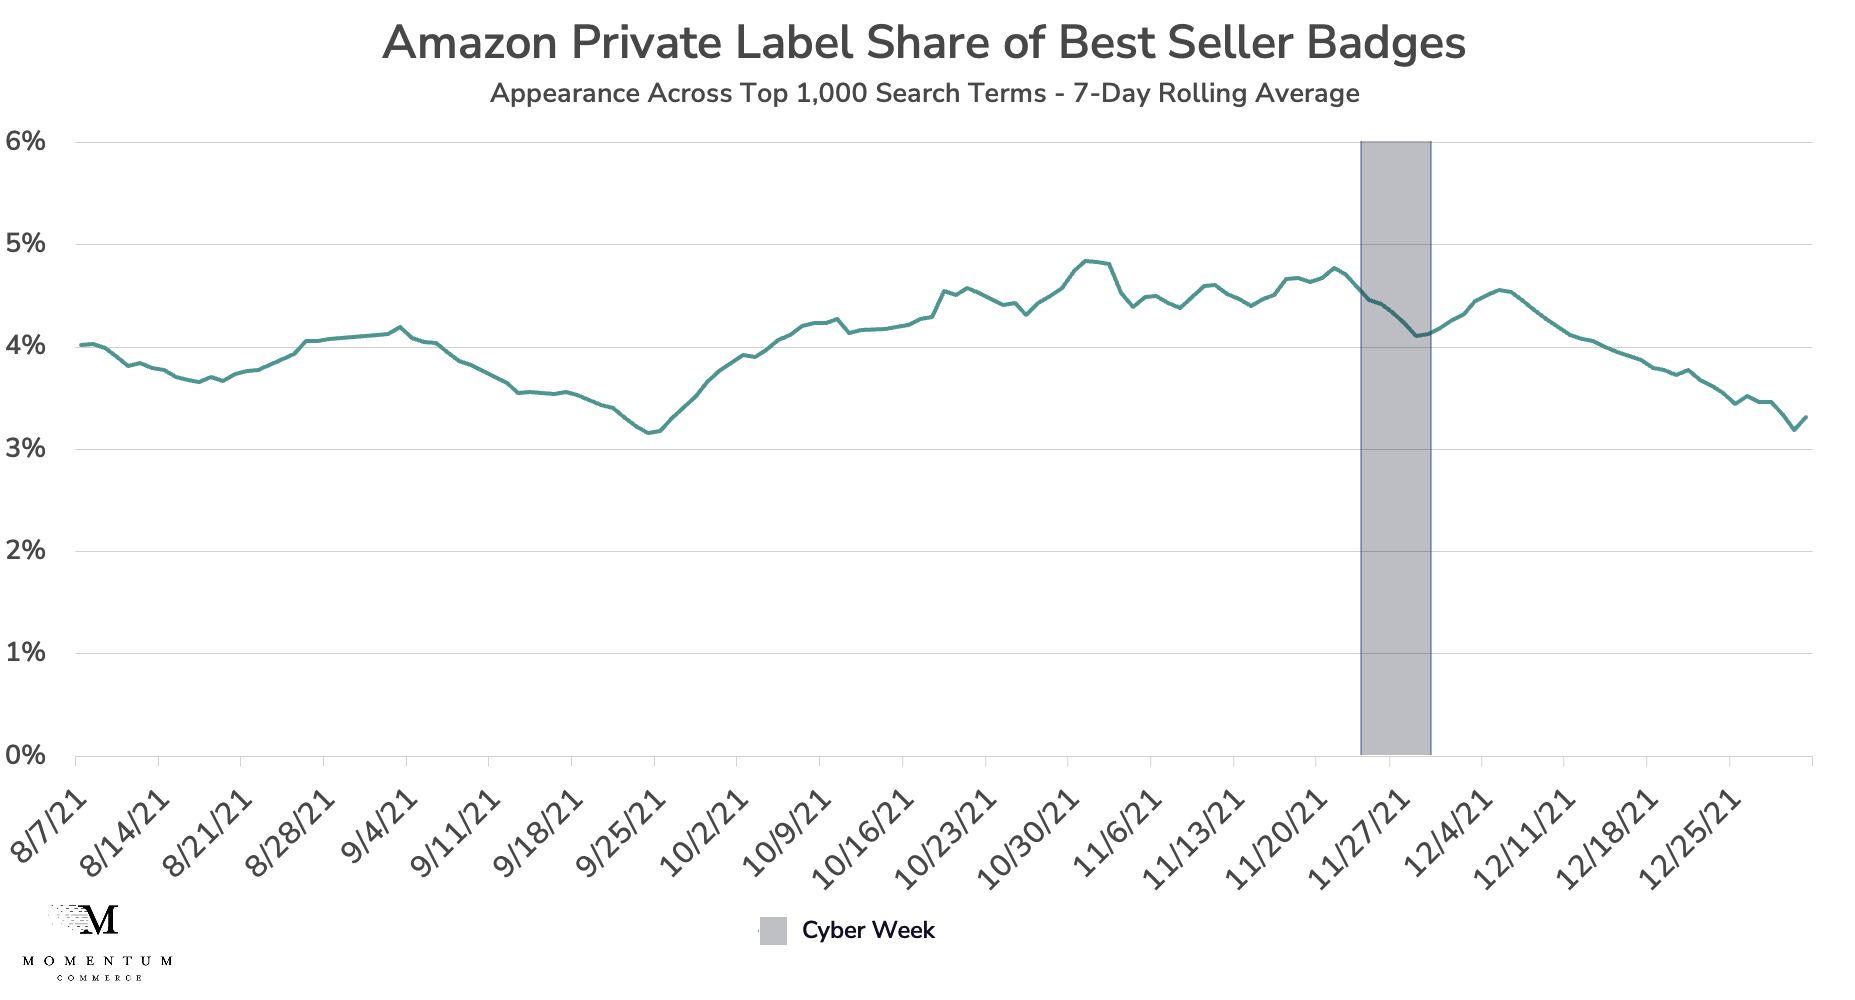 Amazon Private Label Share of Best Seller Badges